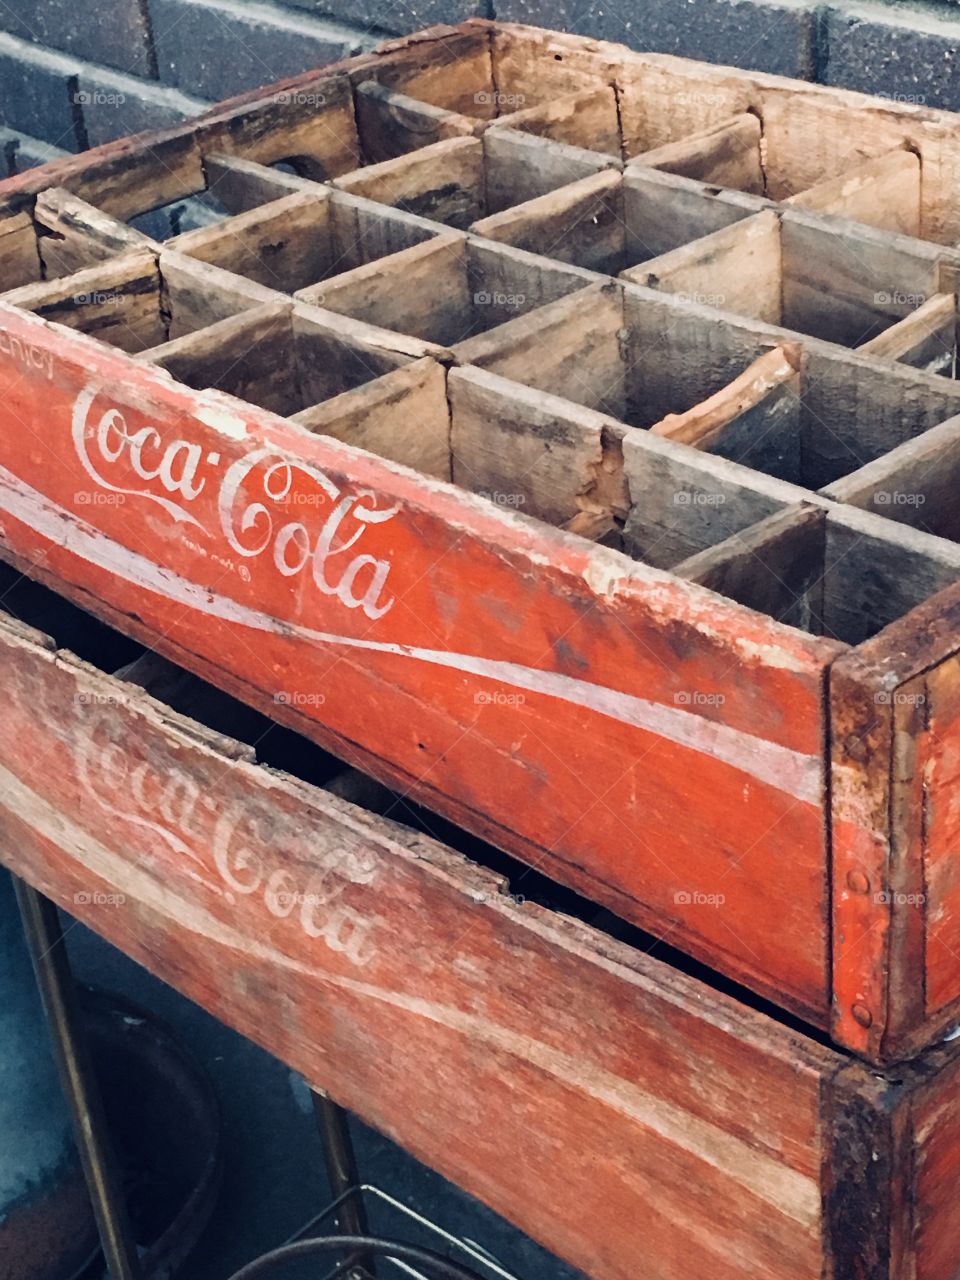 An old worn and antique wooden crate for bottles 